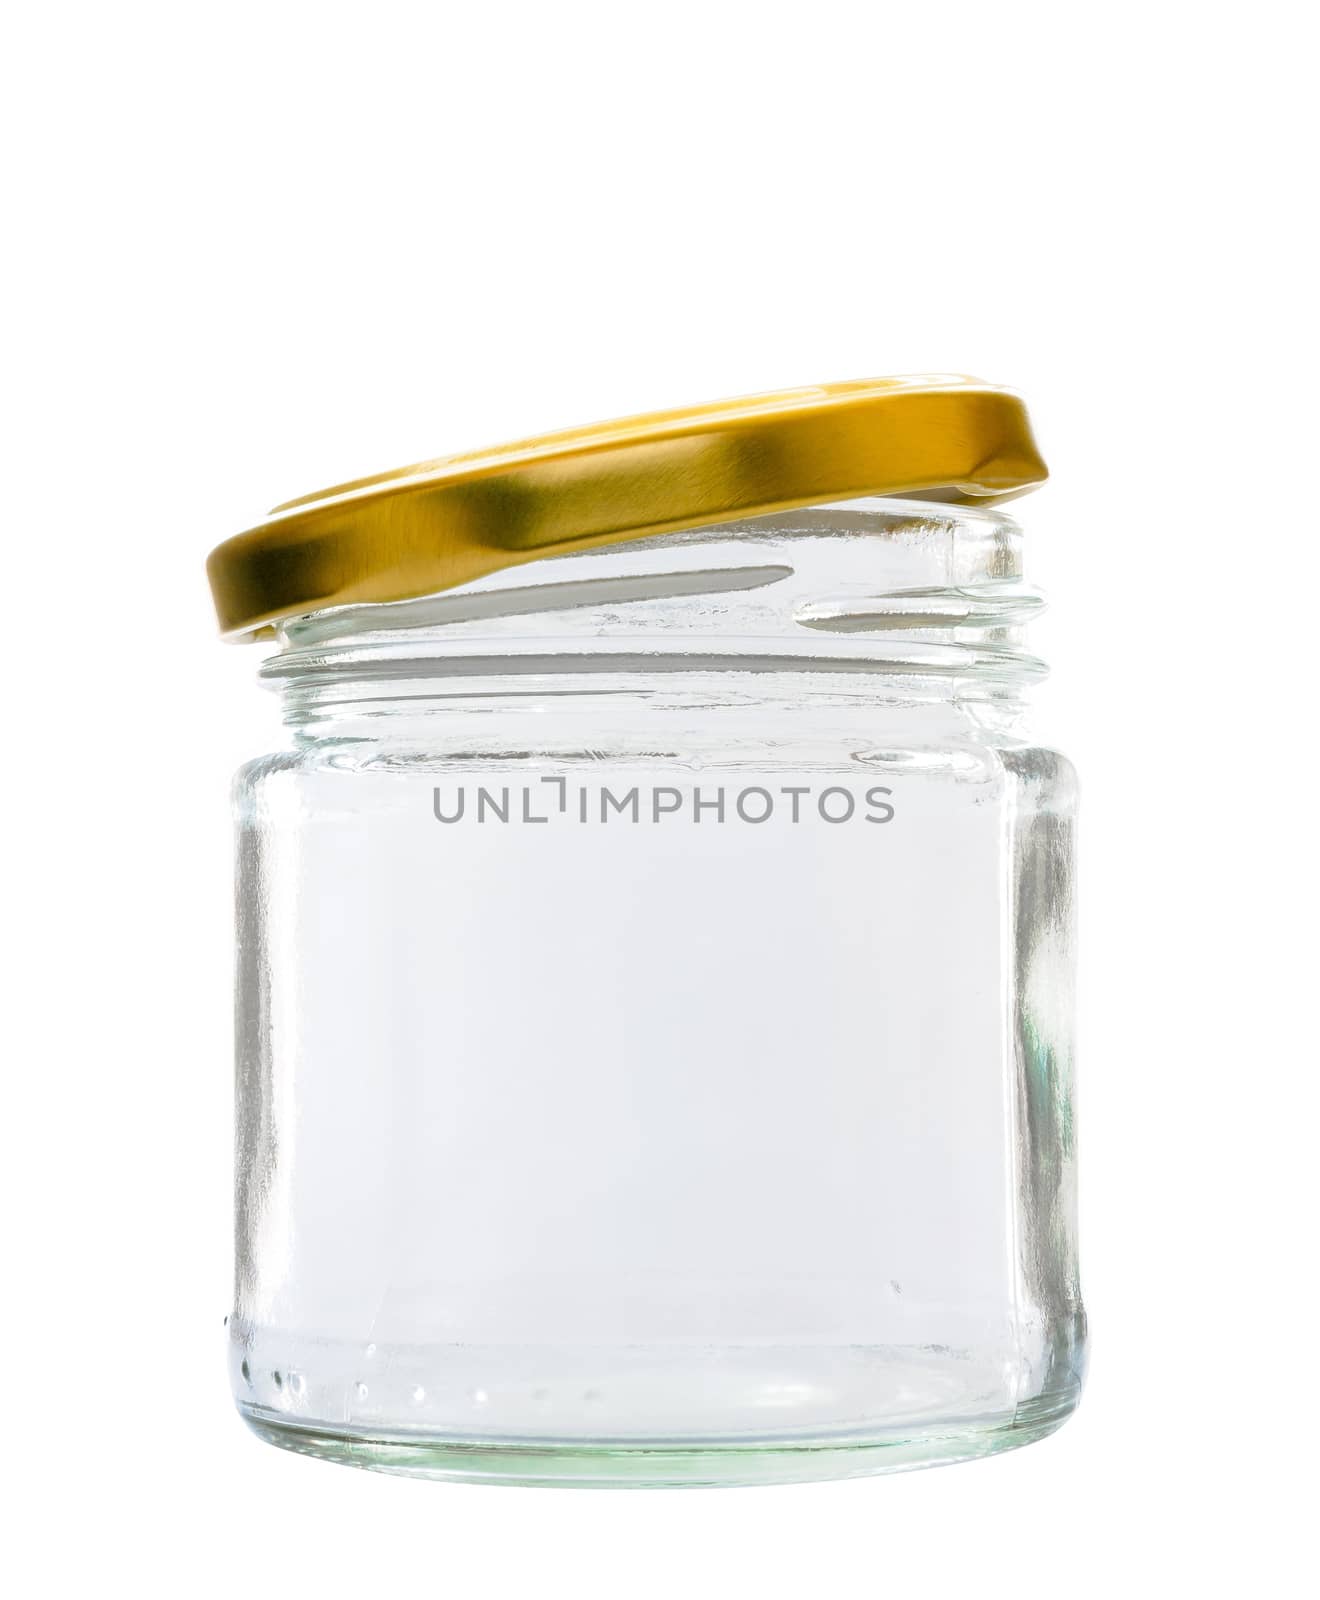 Transparent glass jar on white background, with the open gold color top